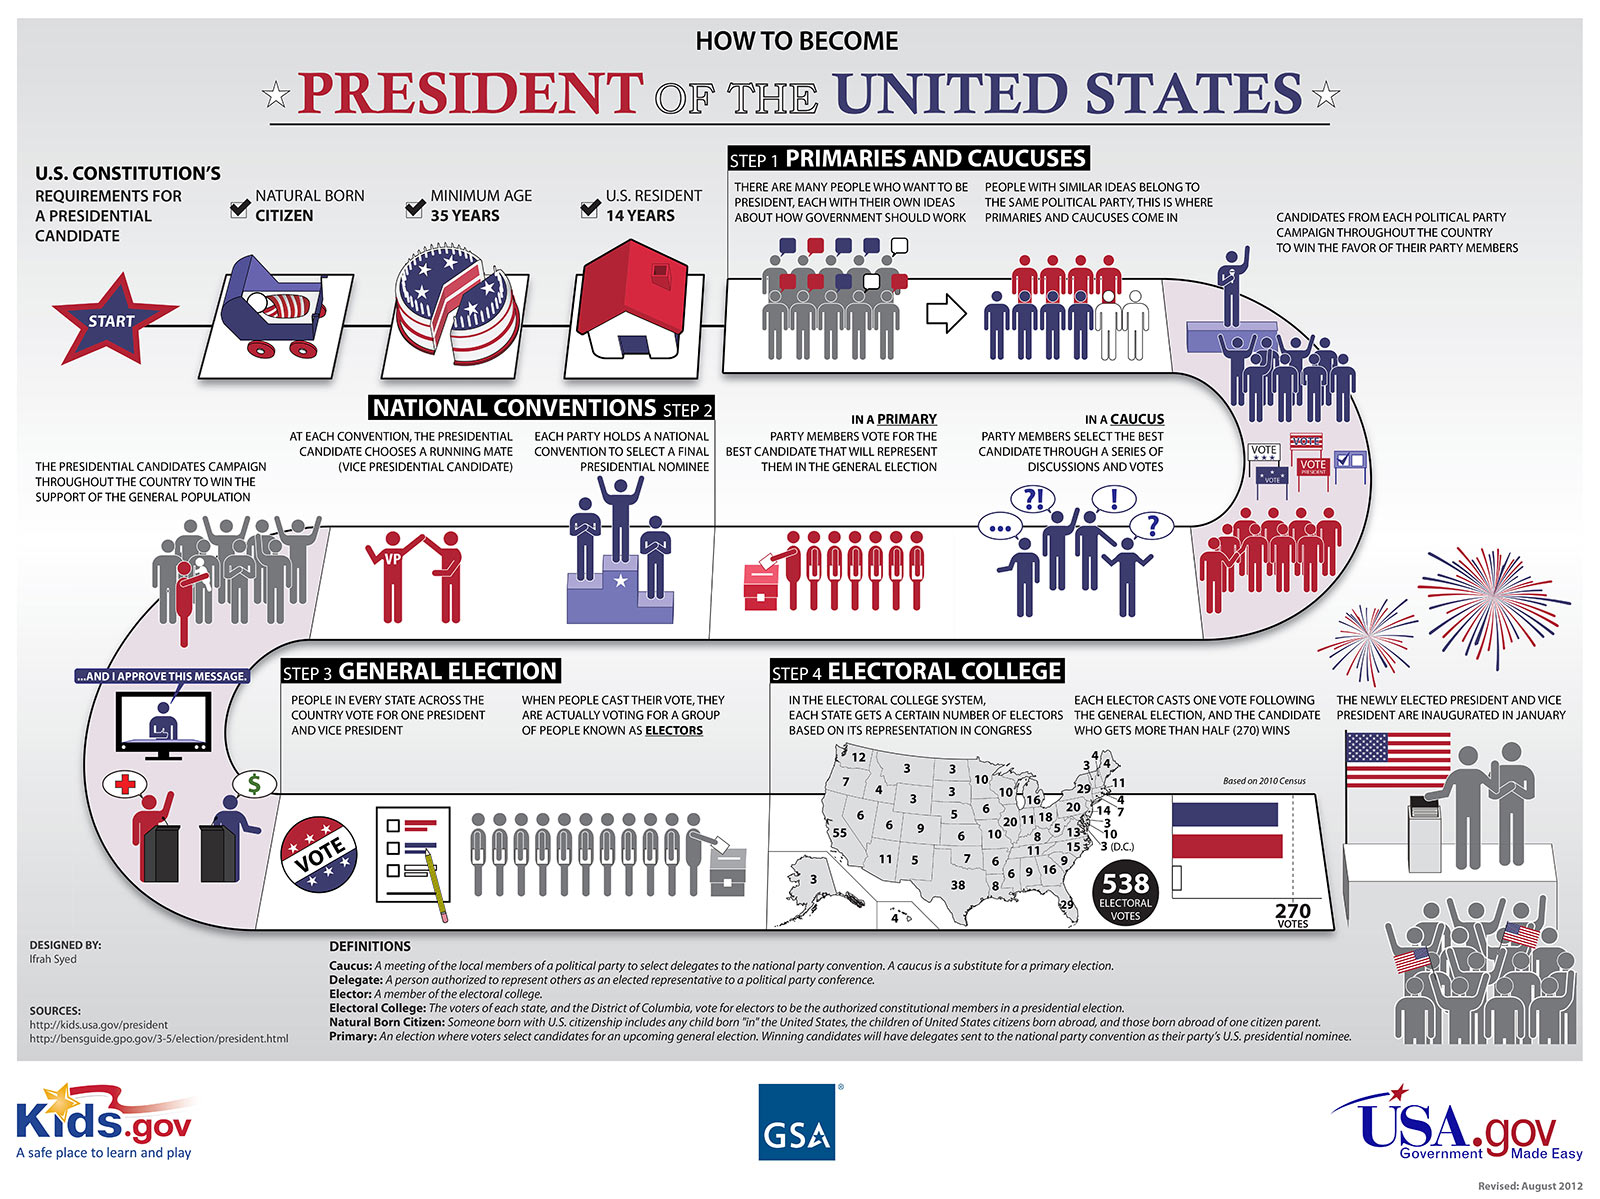 How to Become President of the United States Infographic